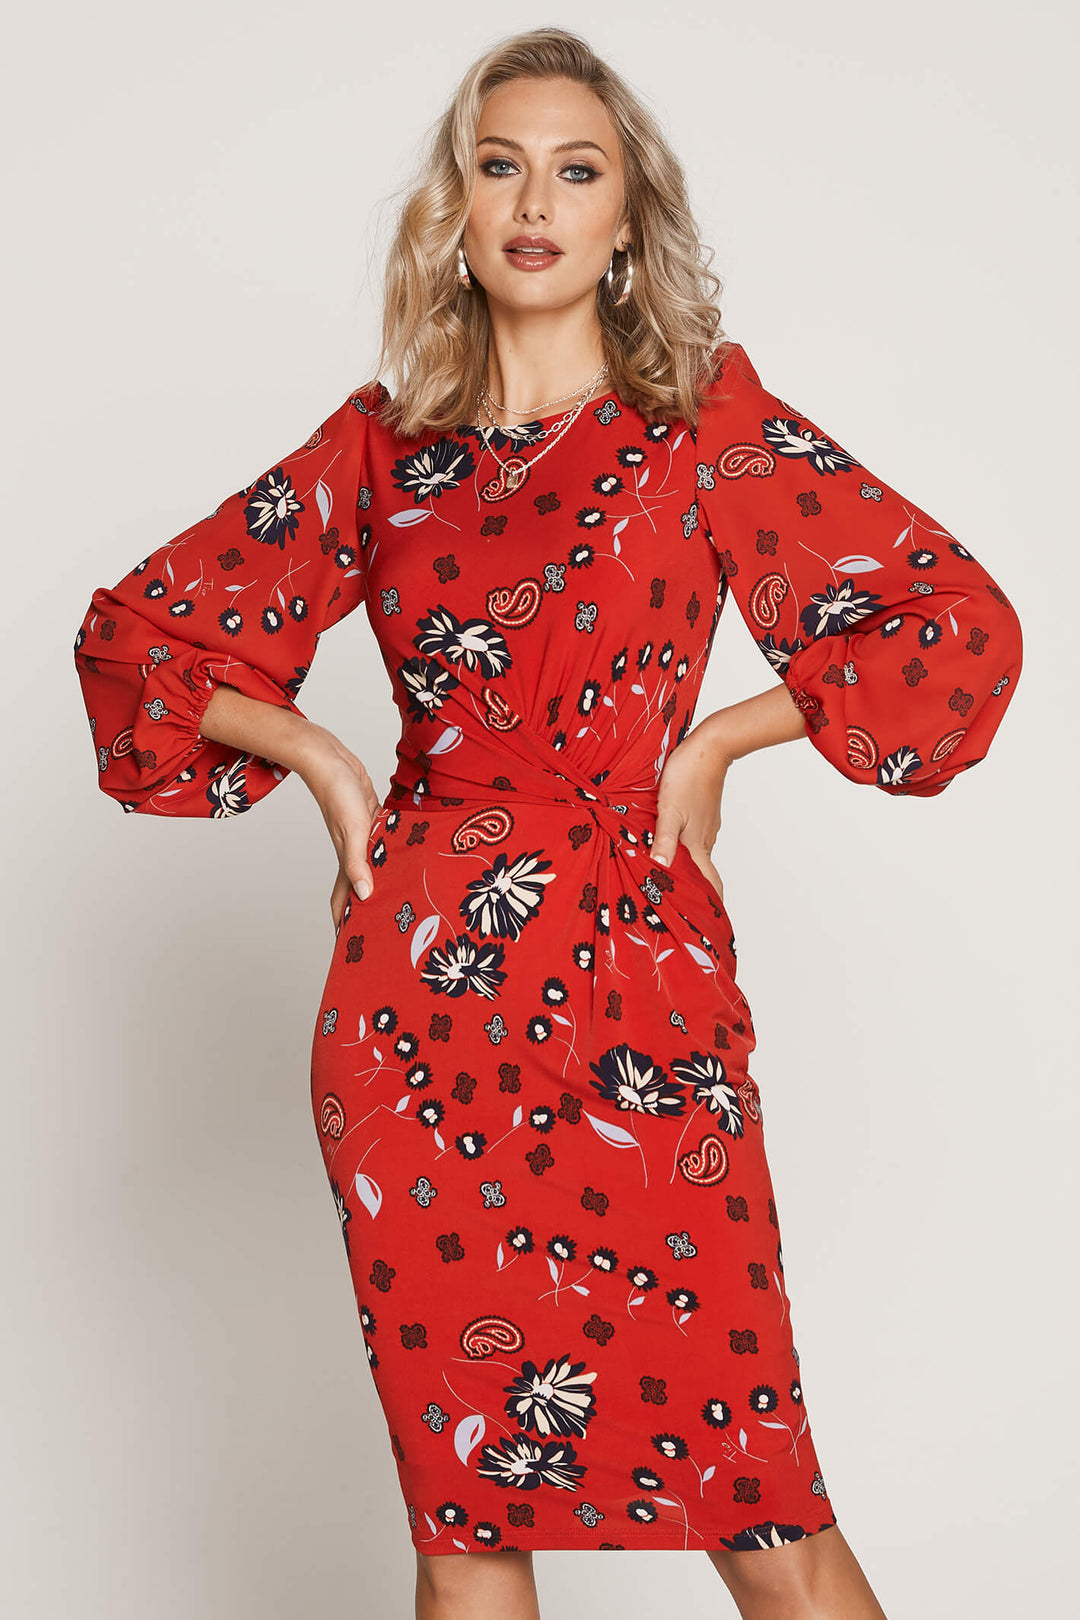 Tia 78173 Red Paisley Print Puff Sleeve Dress - Experience Boutique